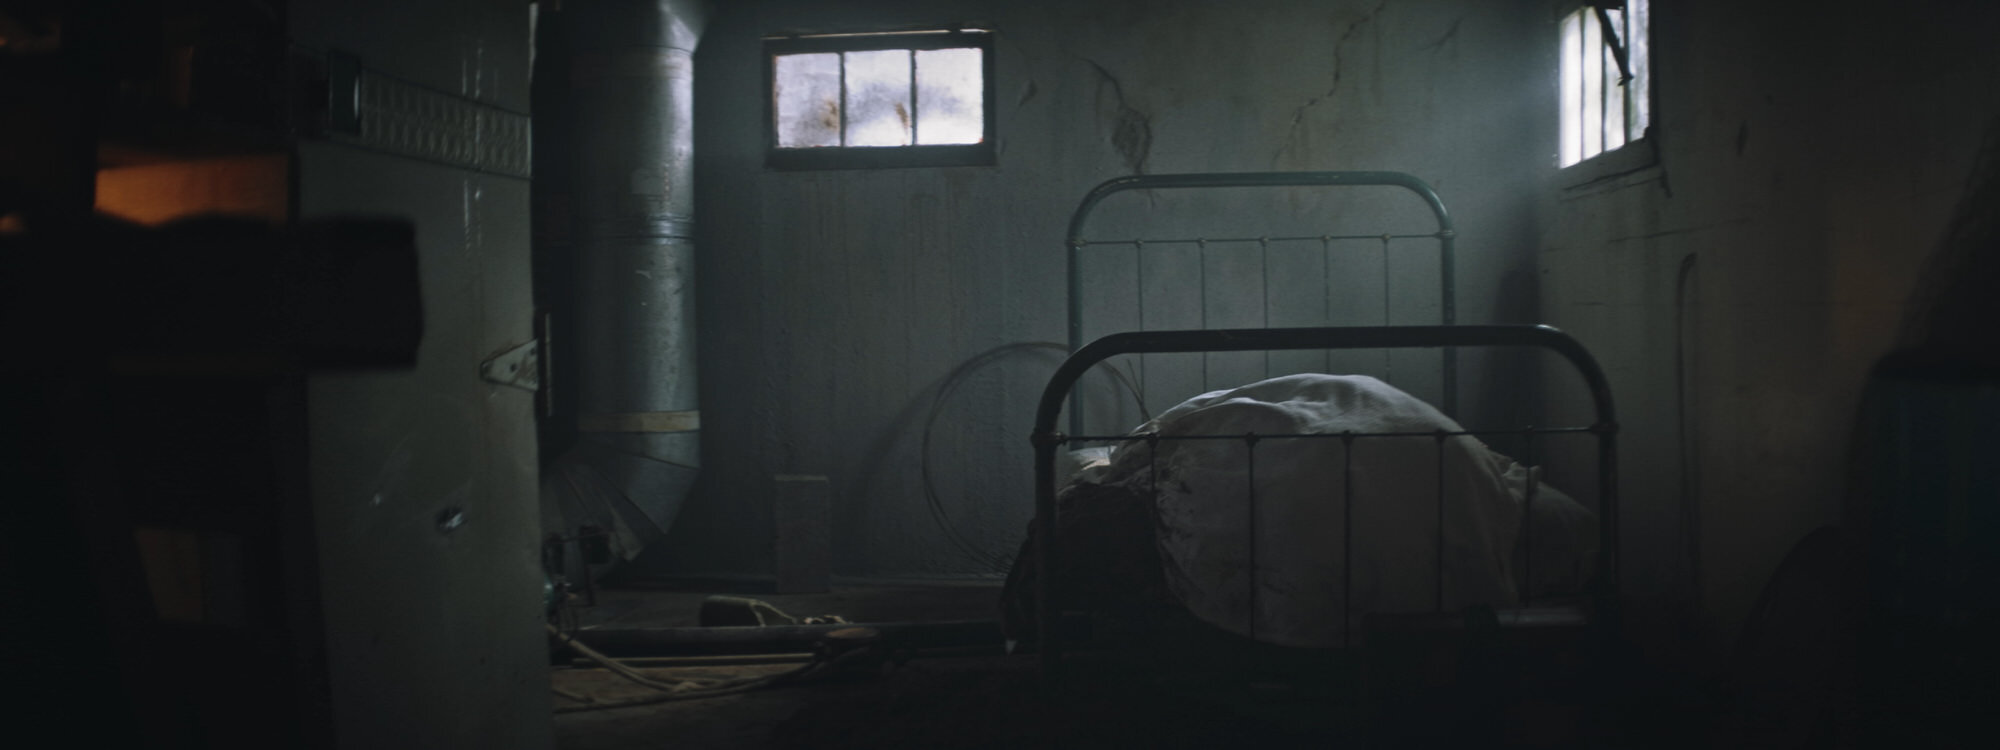 The Altruist - Seemingly empty bed in dark and grungy room